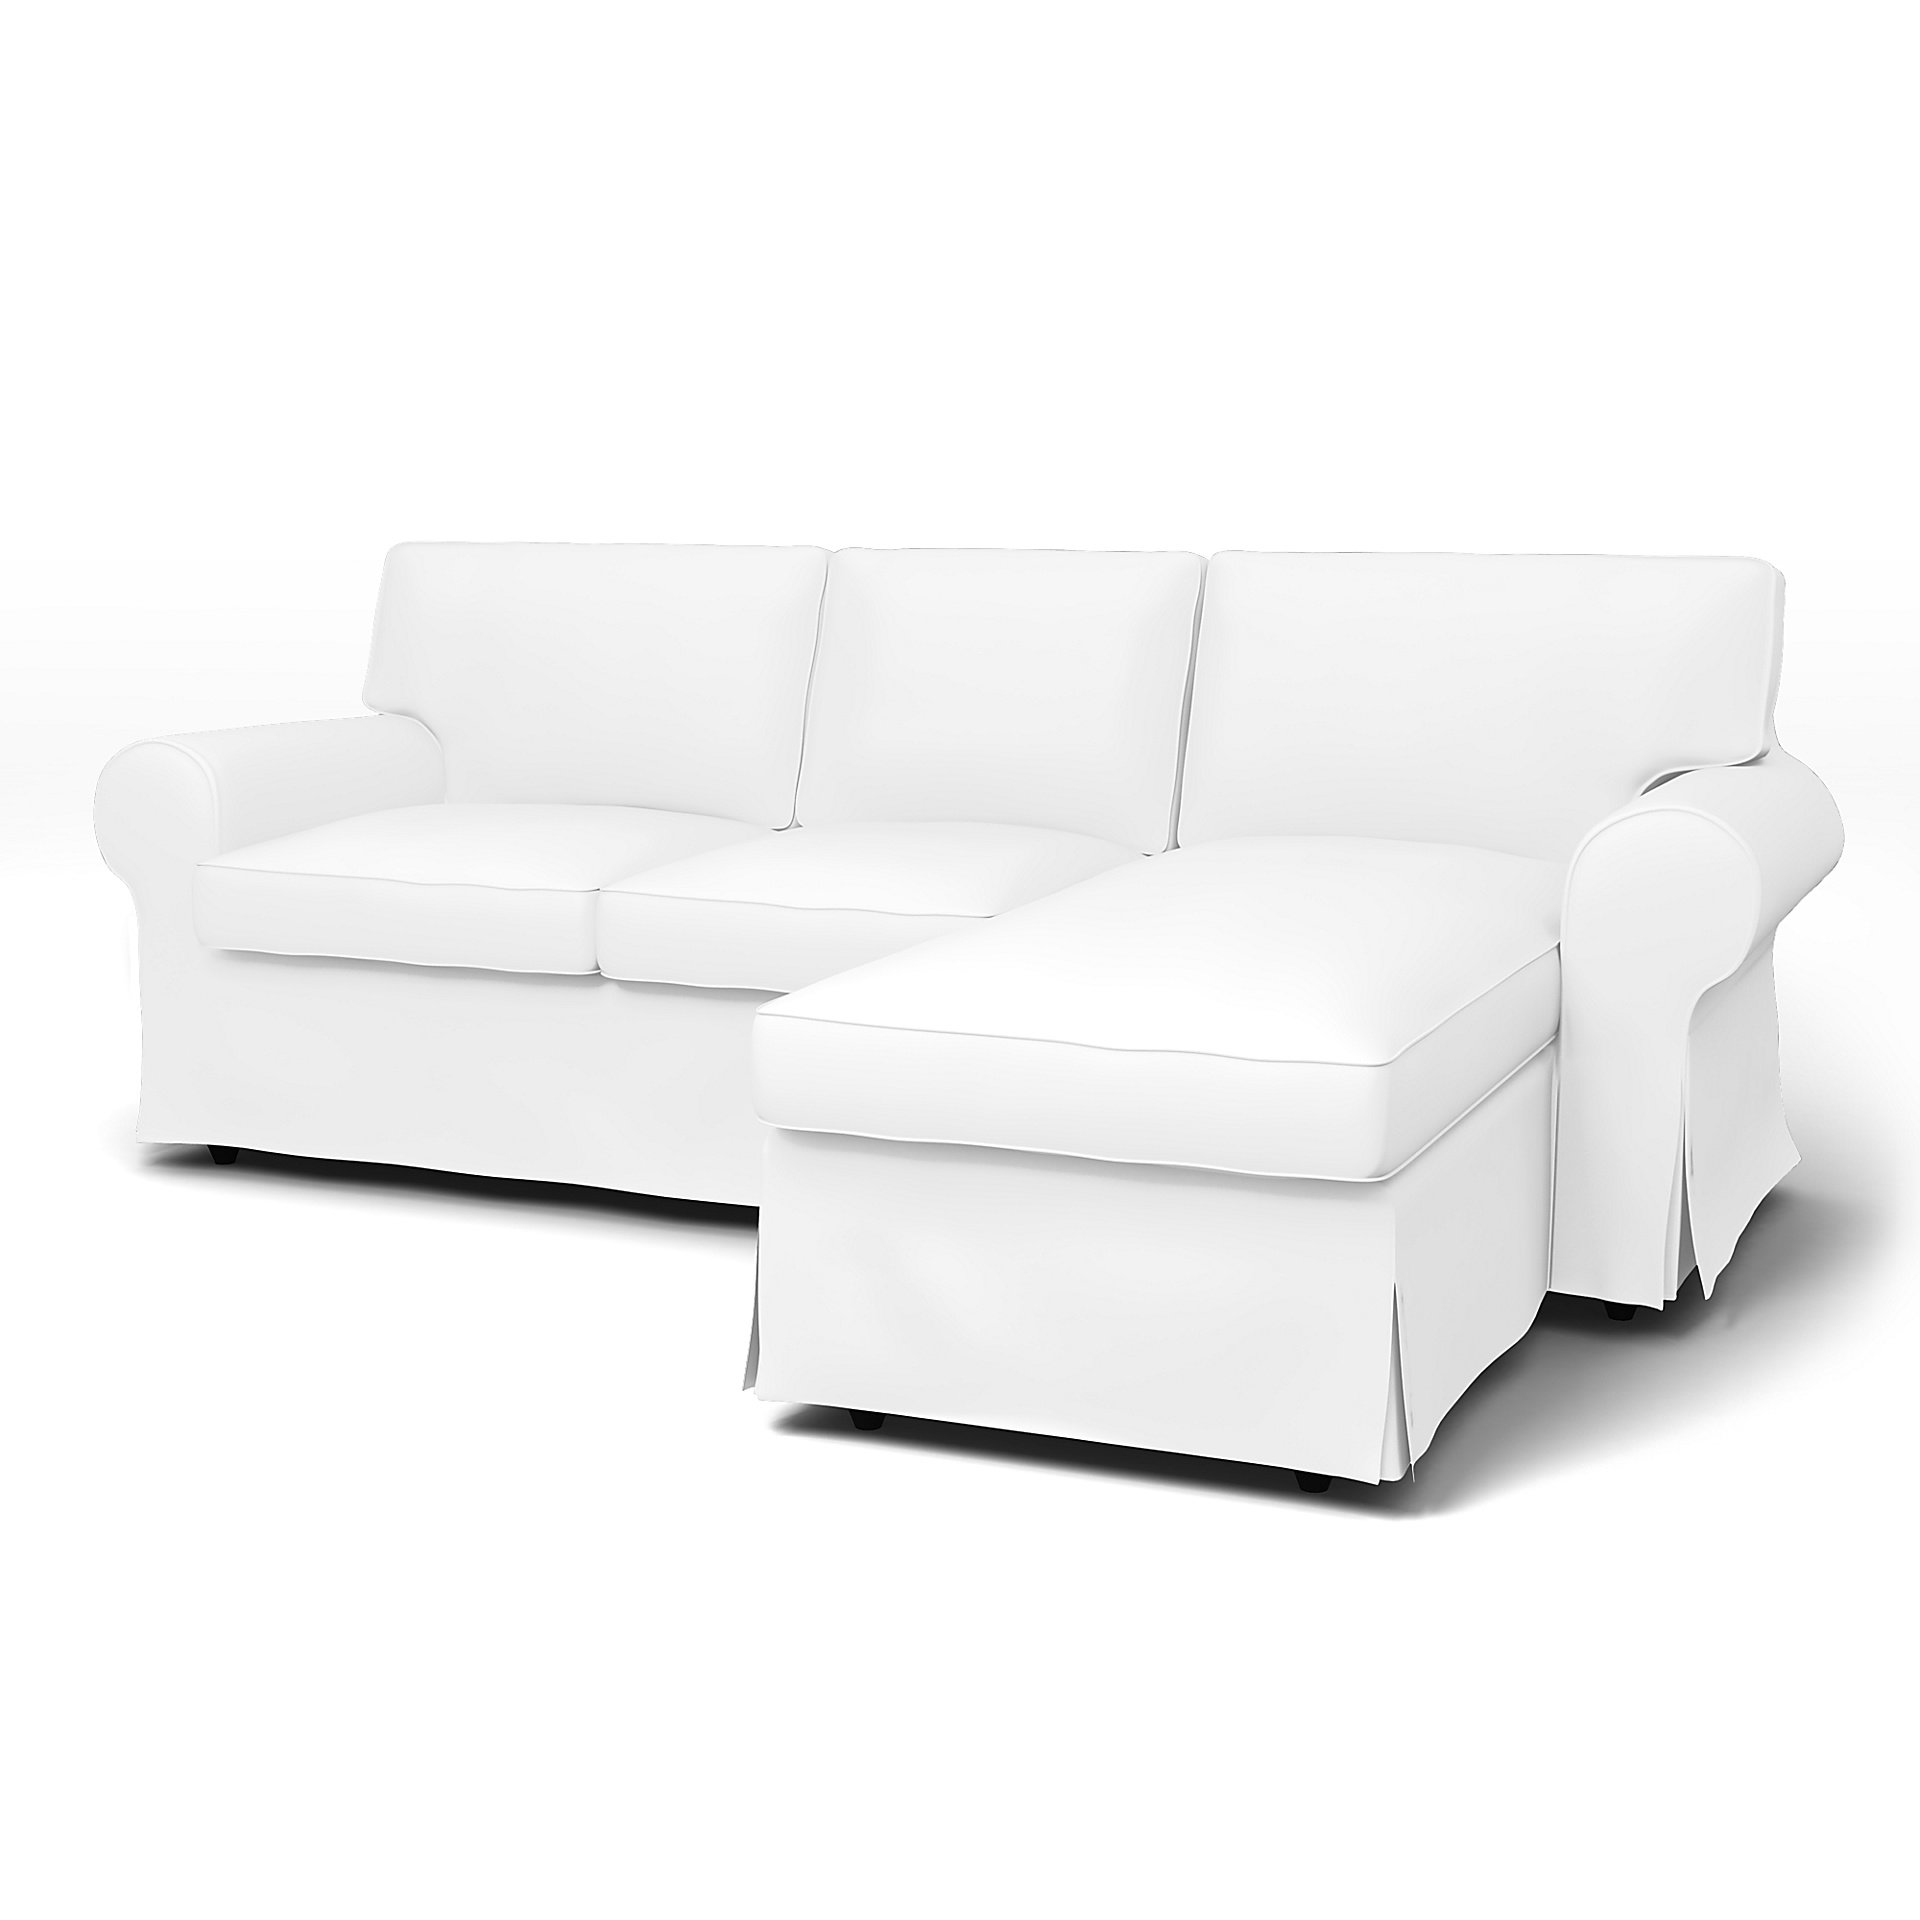 IKEA - Ektorp 3 Seater Sofa with Chaise Cover, Absolute White, Linen - Bemz